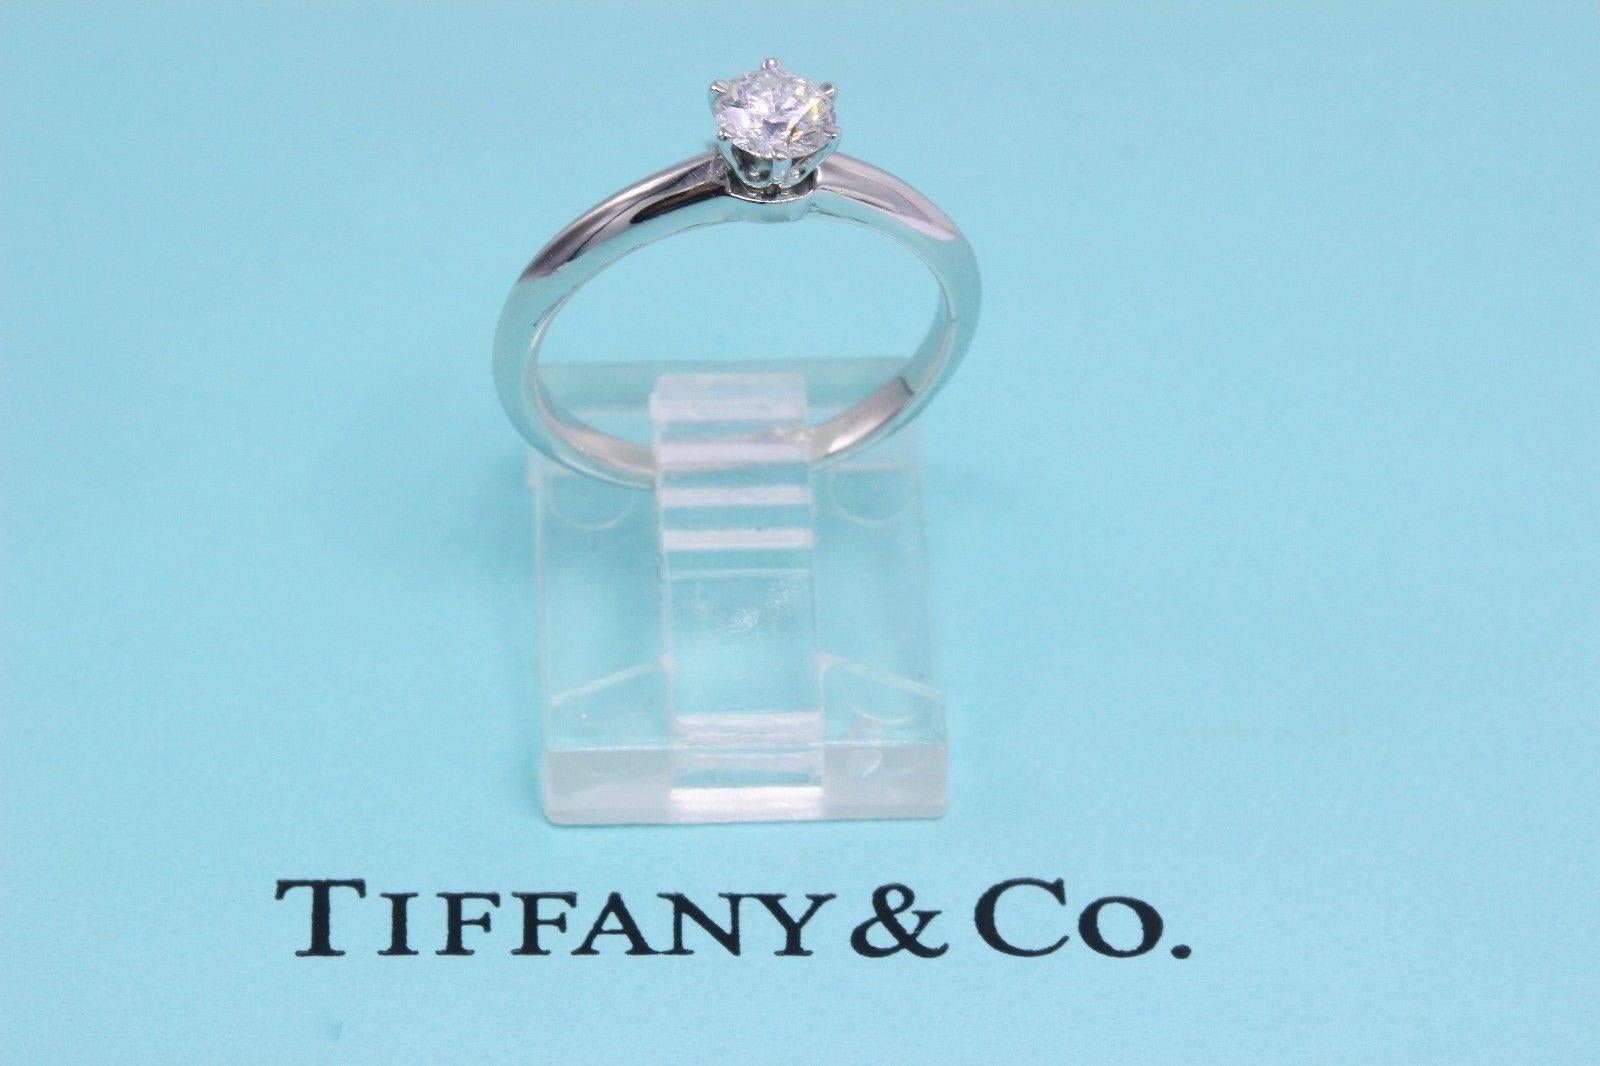 Tiffany & Co. Classic Engagement Ring
Style: 6 Prong Solitaire 
Serial Number: D56043
Metal:  Platinum PT950
Total Carat Weight:  0.40 TCW
Main Diamond Shape: Round Brilliant
Diamond Color & Clarity:  I / VVS2
Hallmark:  Tiffany&Co.PT950 D56043.40